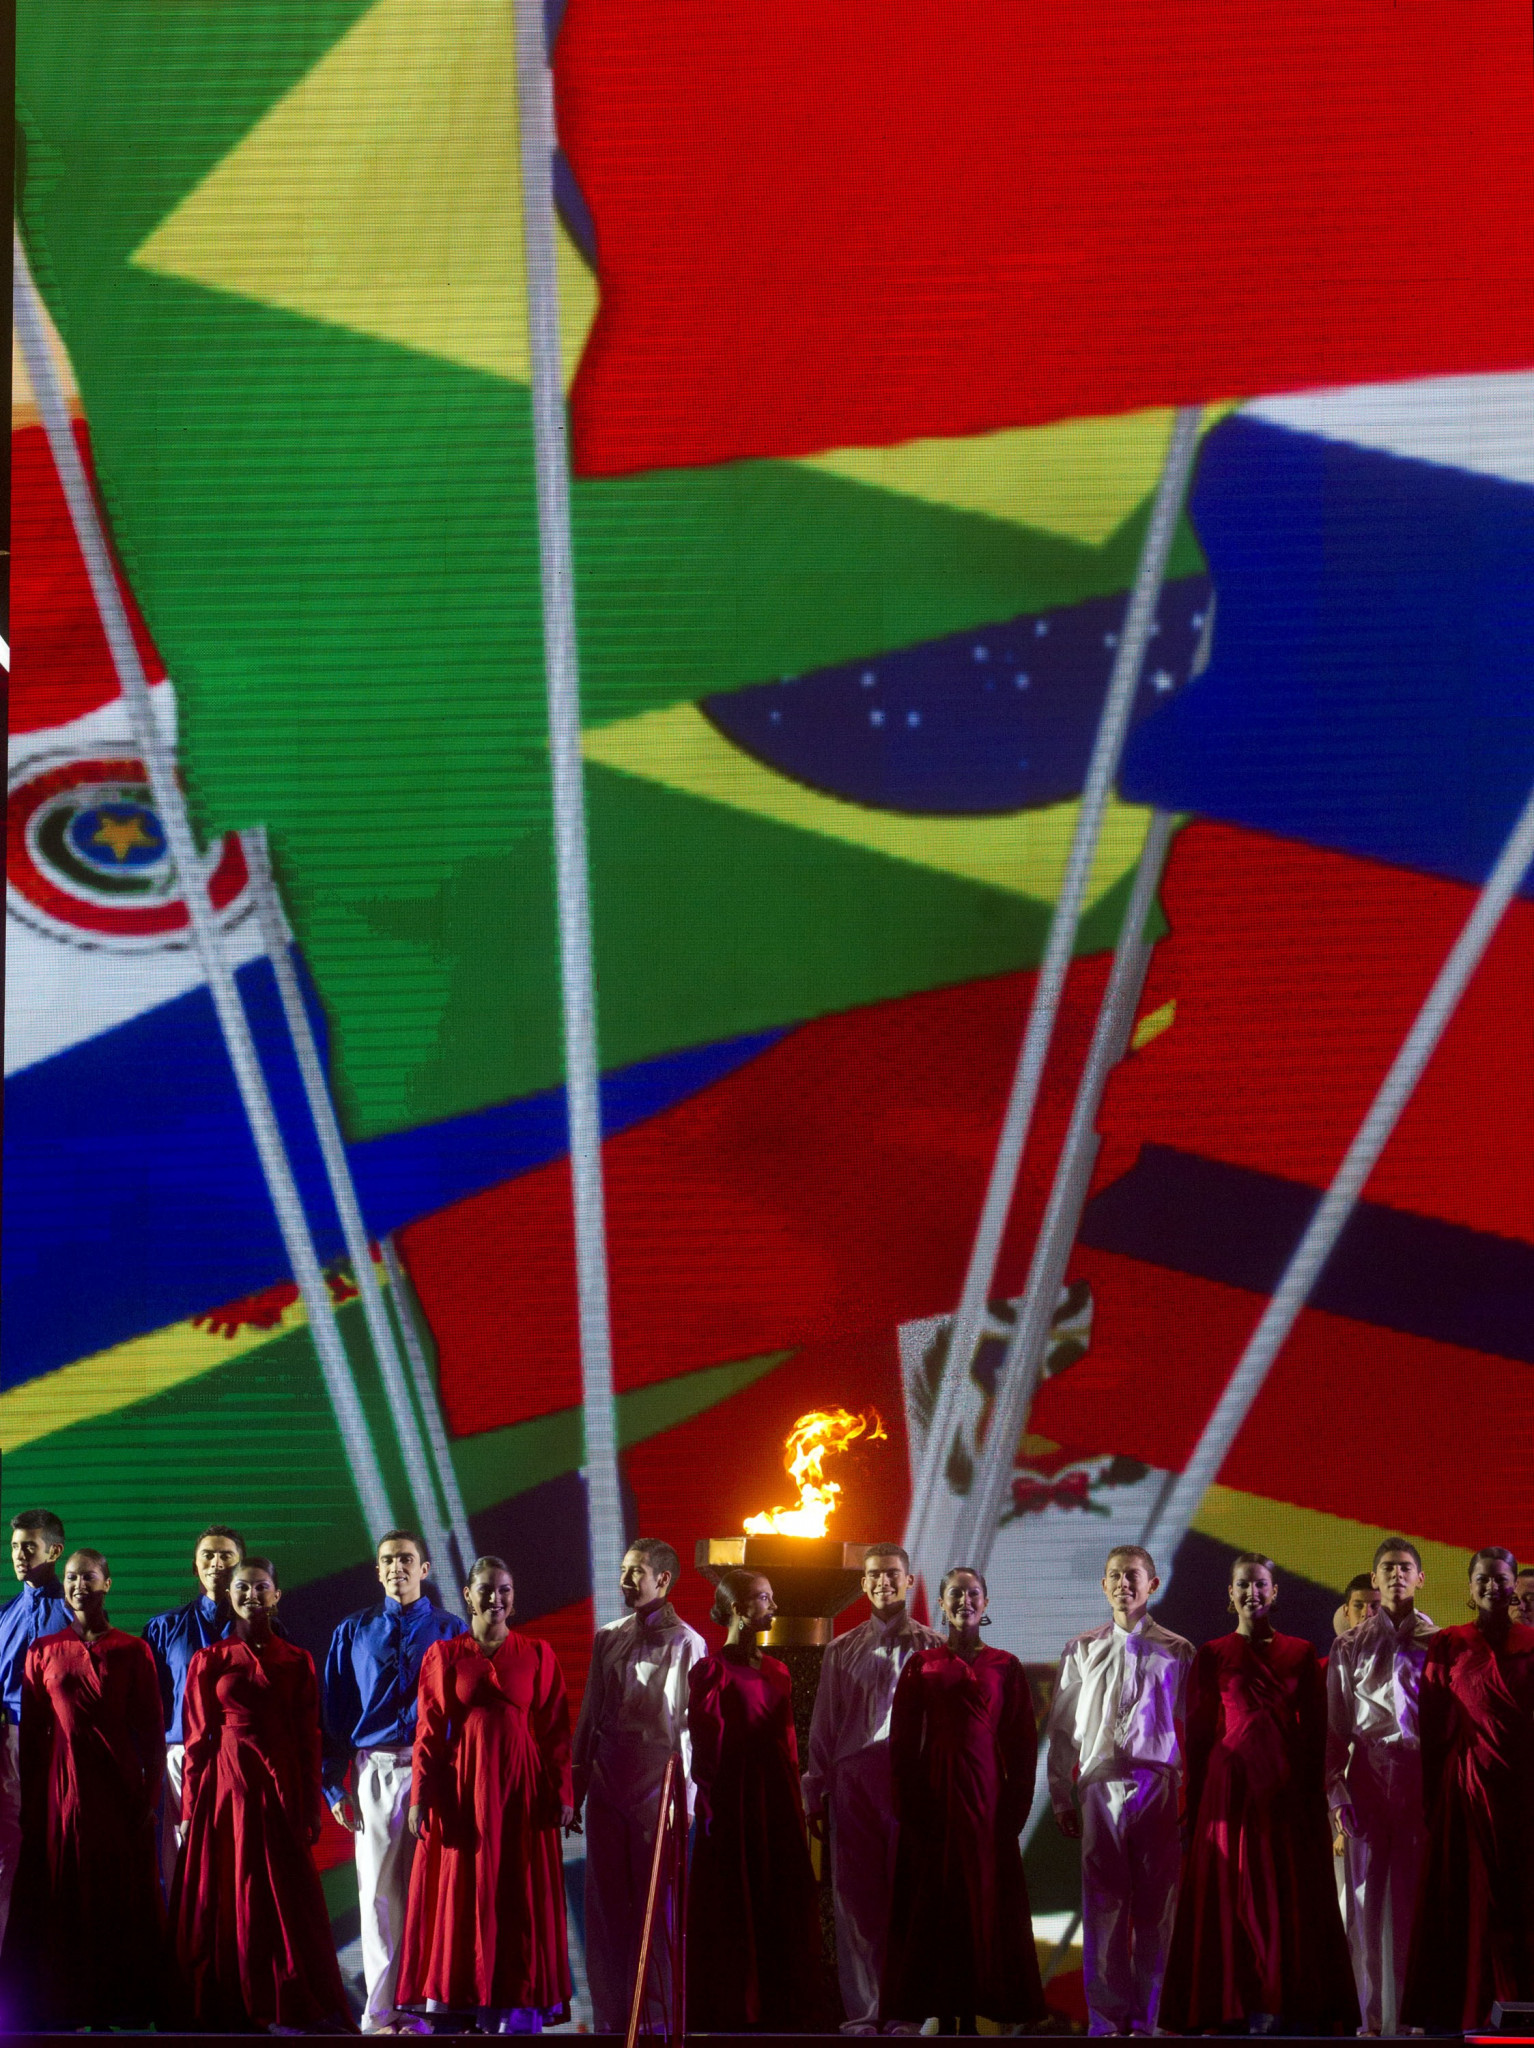 The last edition of the South American Games took place in Chile's capital Santiago in 2014 ©Getty Images